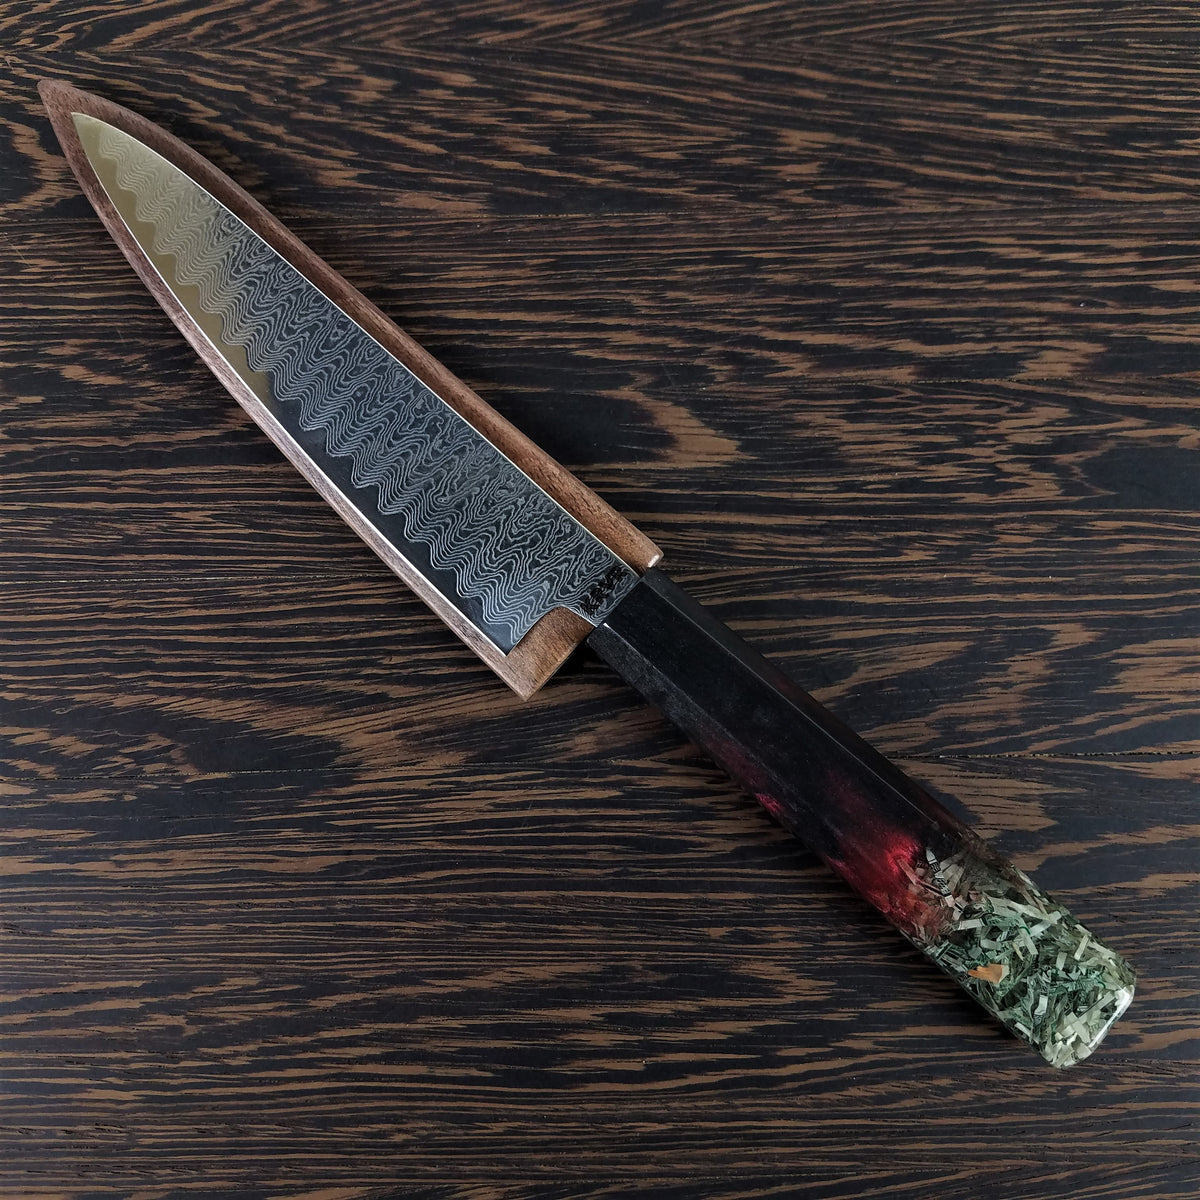 Blood Drive - 6in (150mm) Damascus Petty Culinary Knife